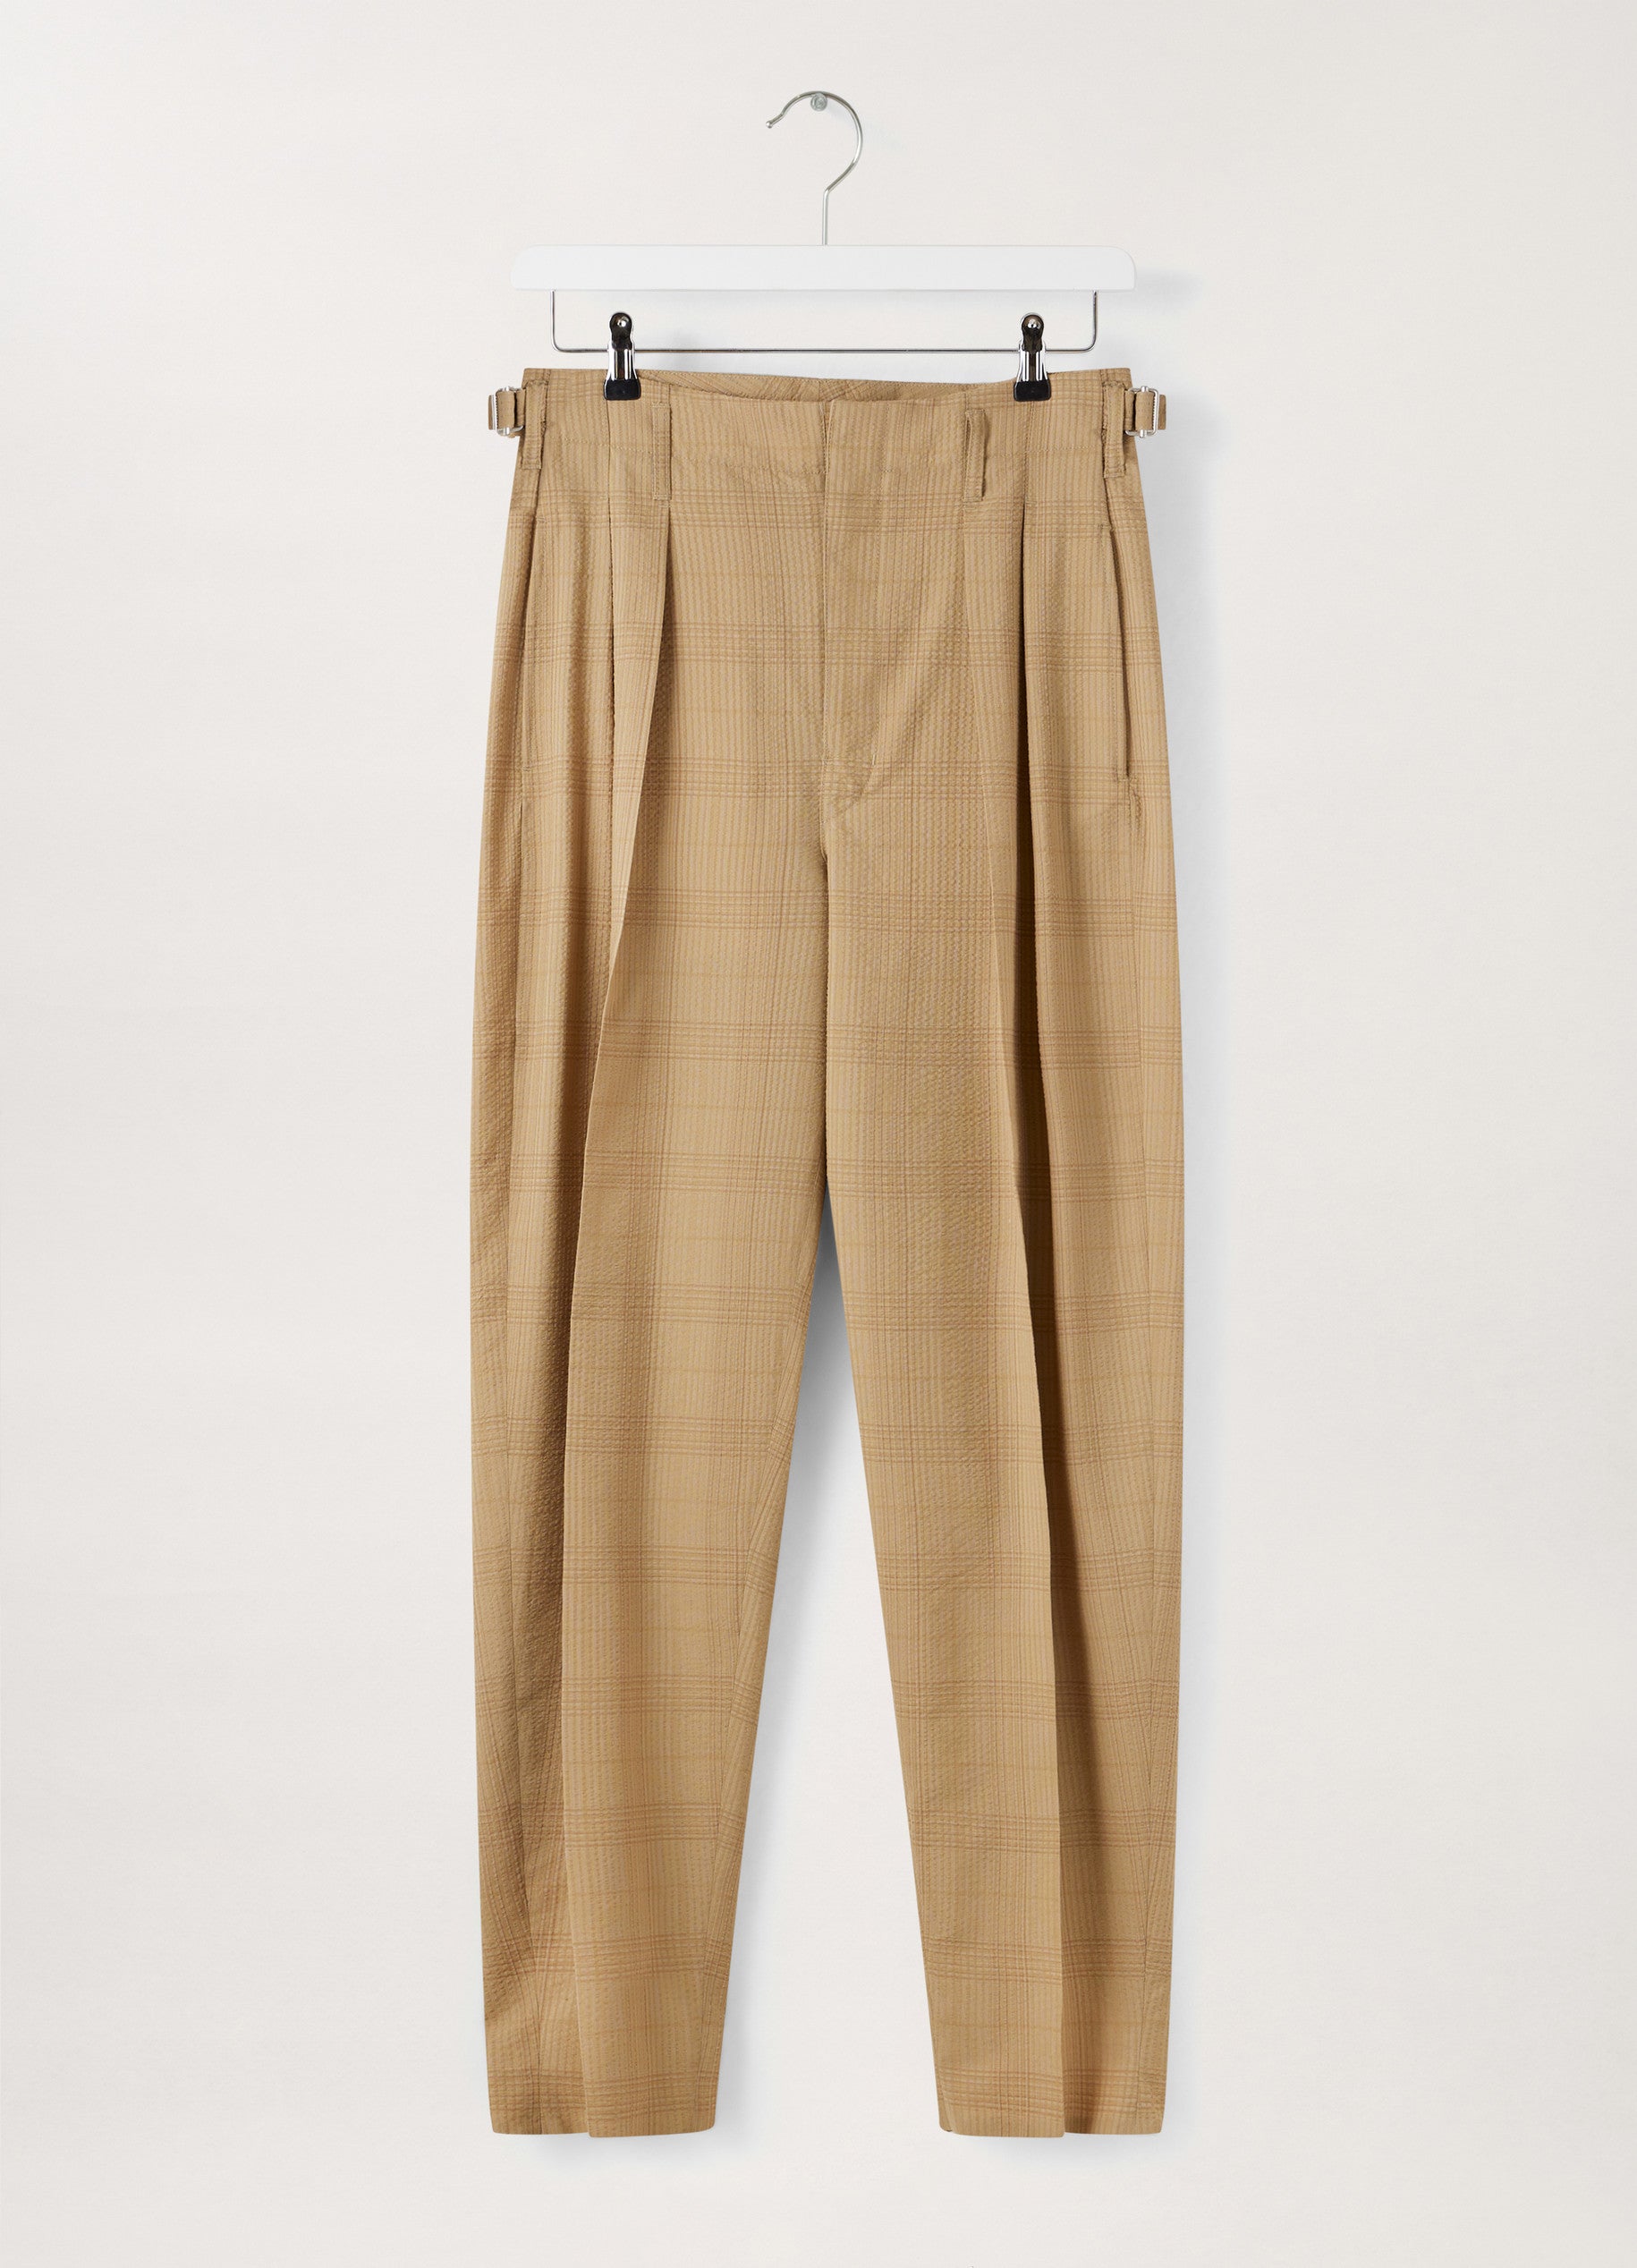 Lemaire Belted Loose Pleated Pants 21aw-